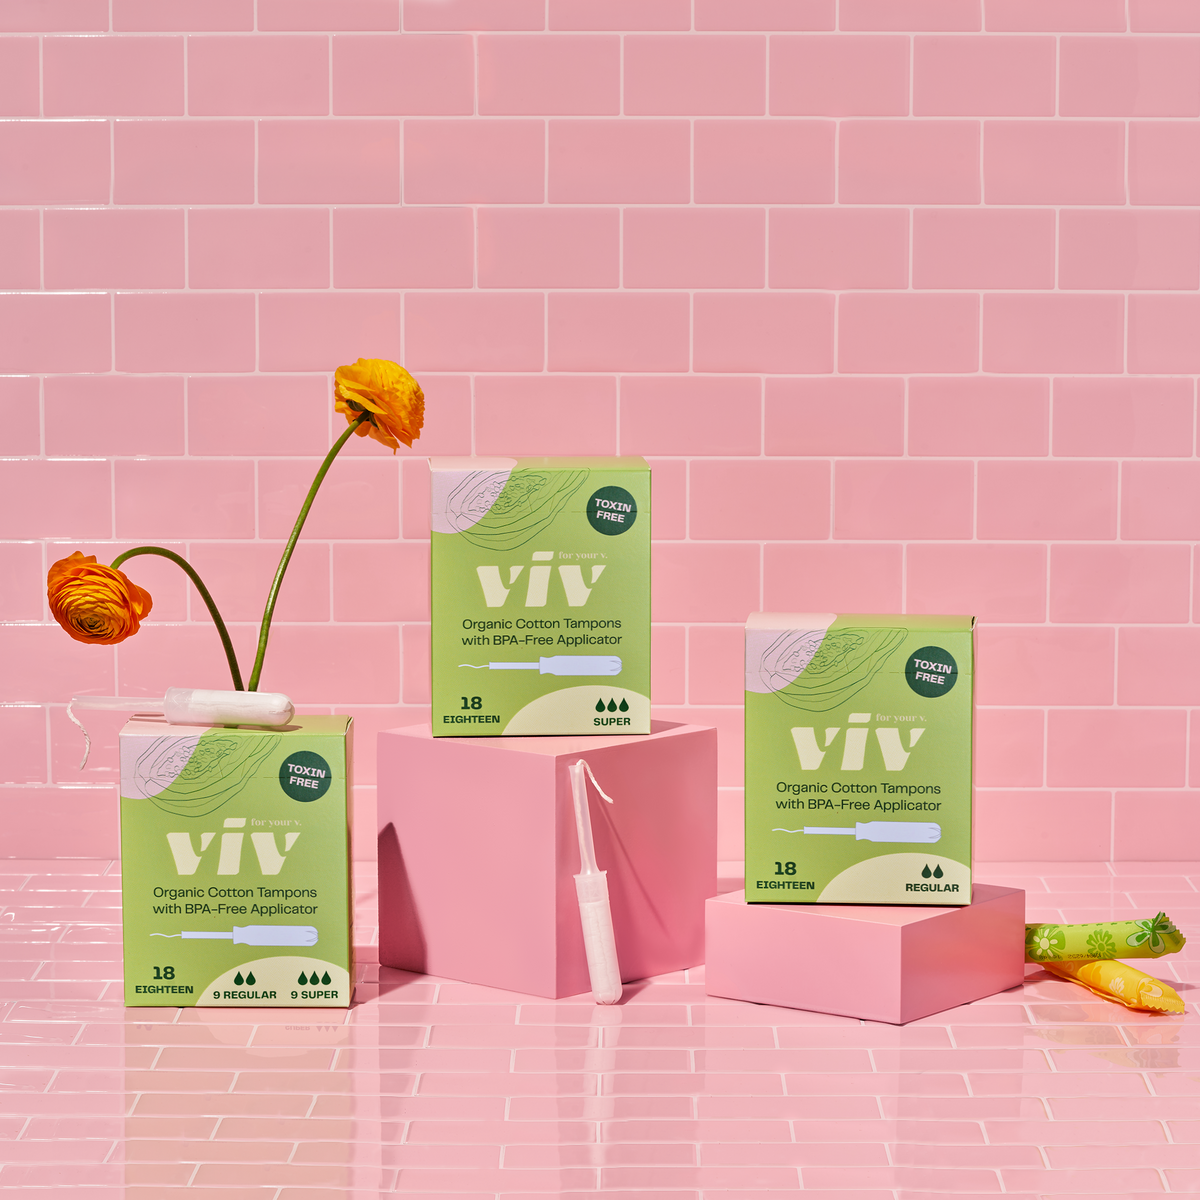 Veeda 100% Natural Cotton Super Plus Absorbency Tampons Compact